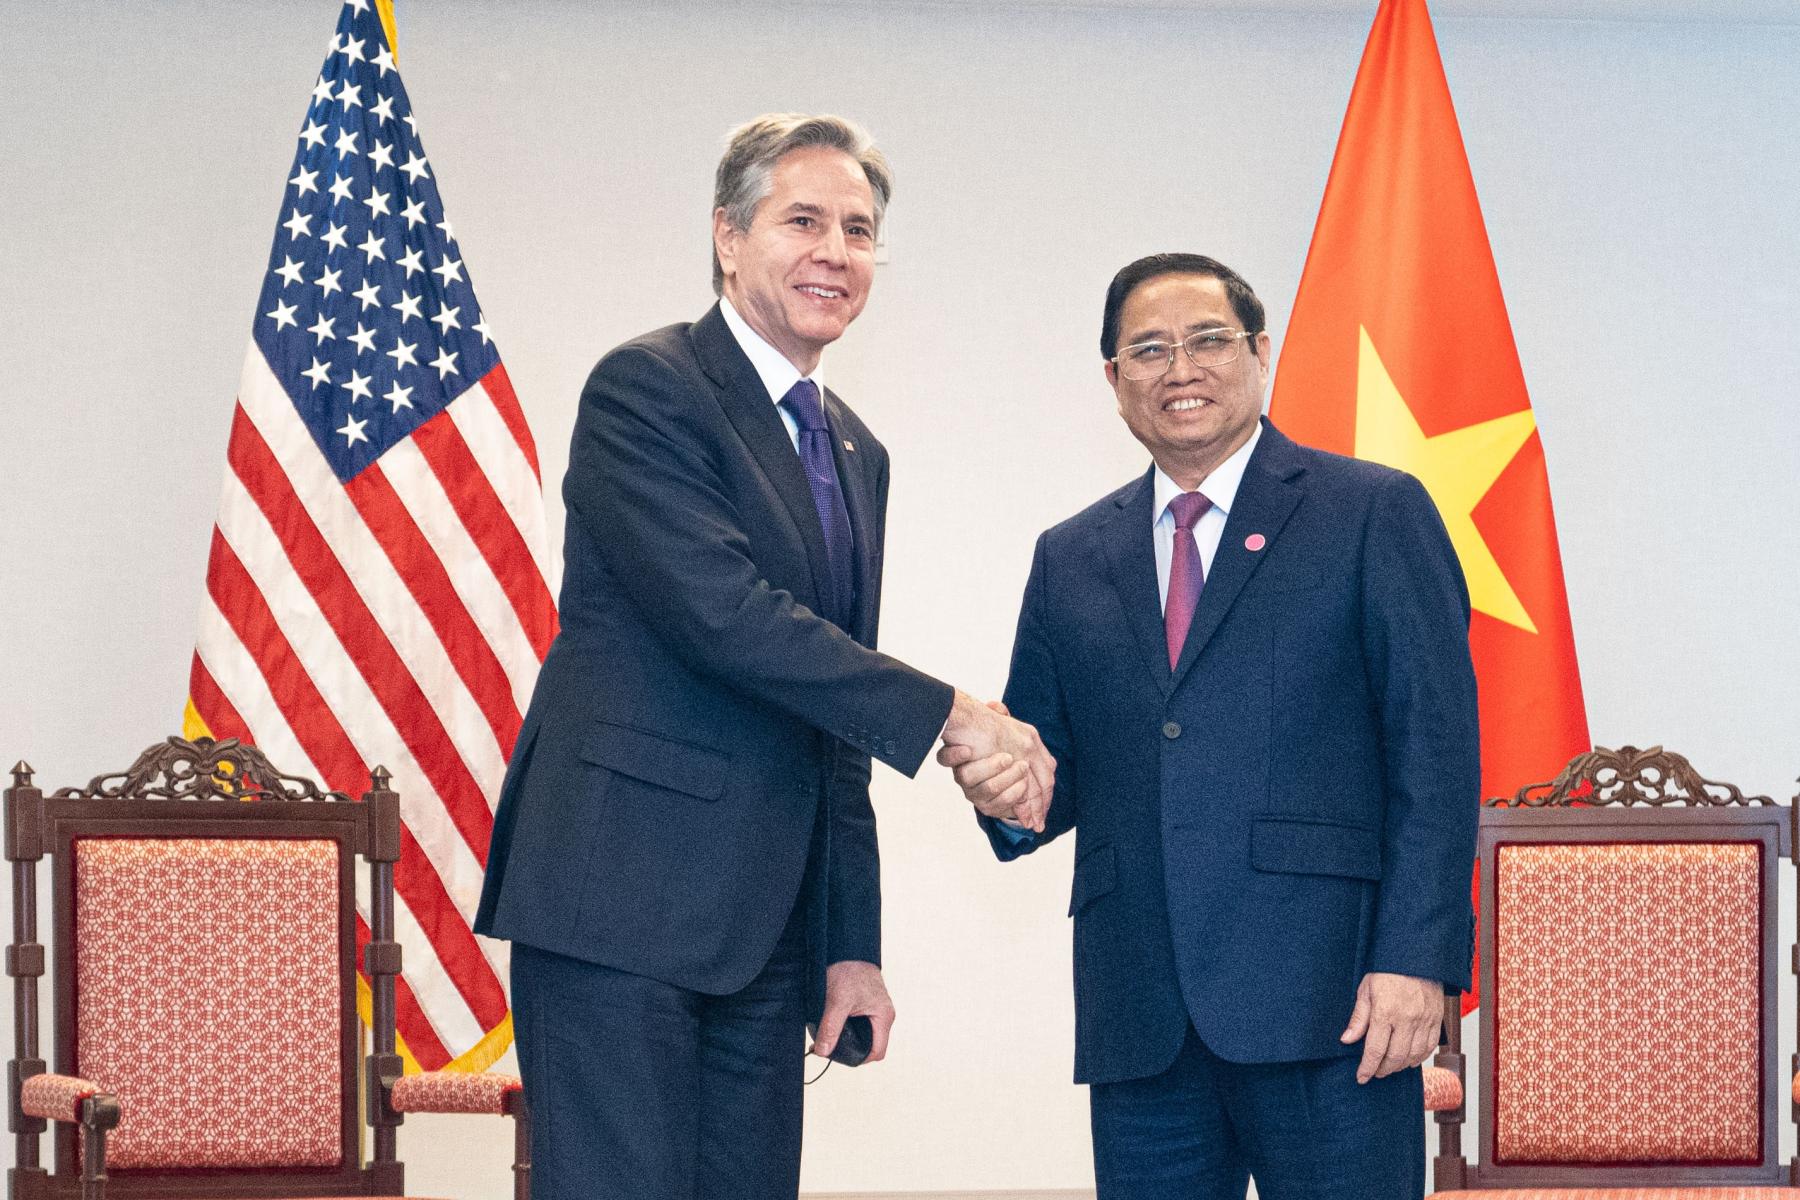 Secretary of State Antony J. Blinken meets with Vietnamese Prime Minister Pham Minh Chinh on May 13, 2022 at the U.S. Department of State in Washington, D.C.